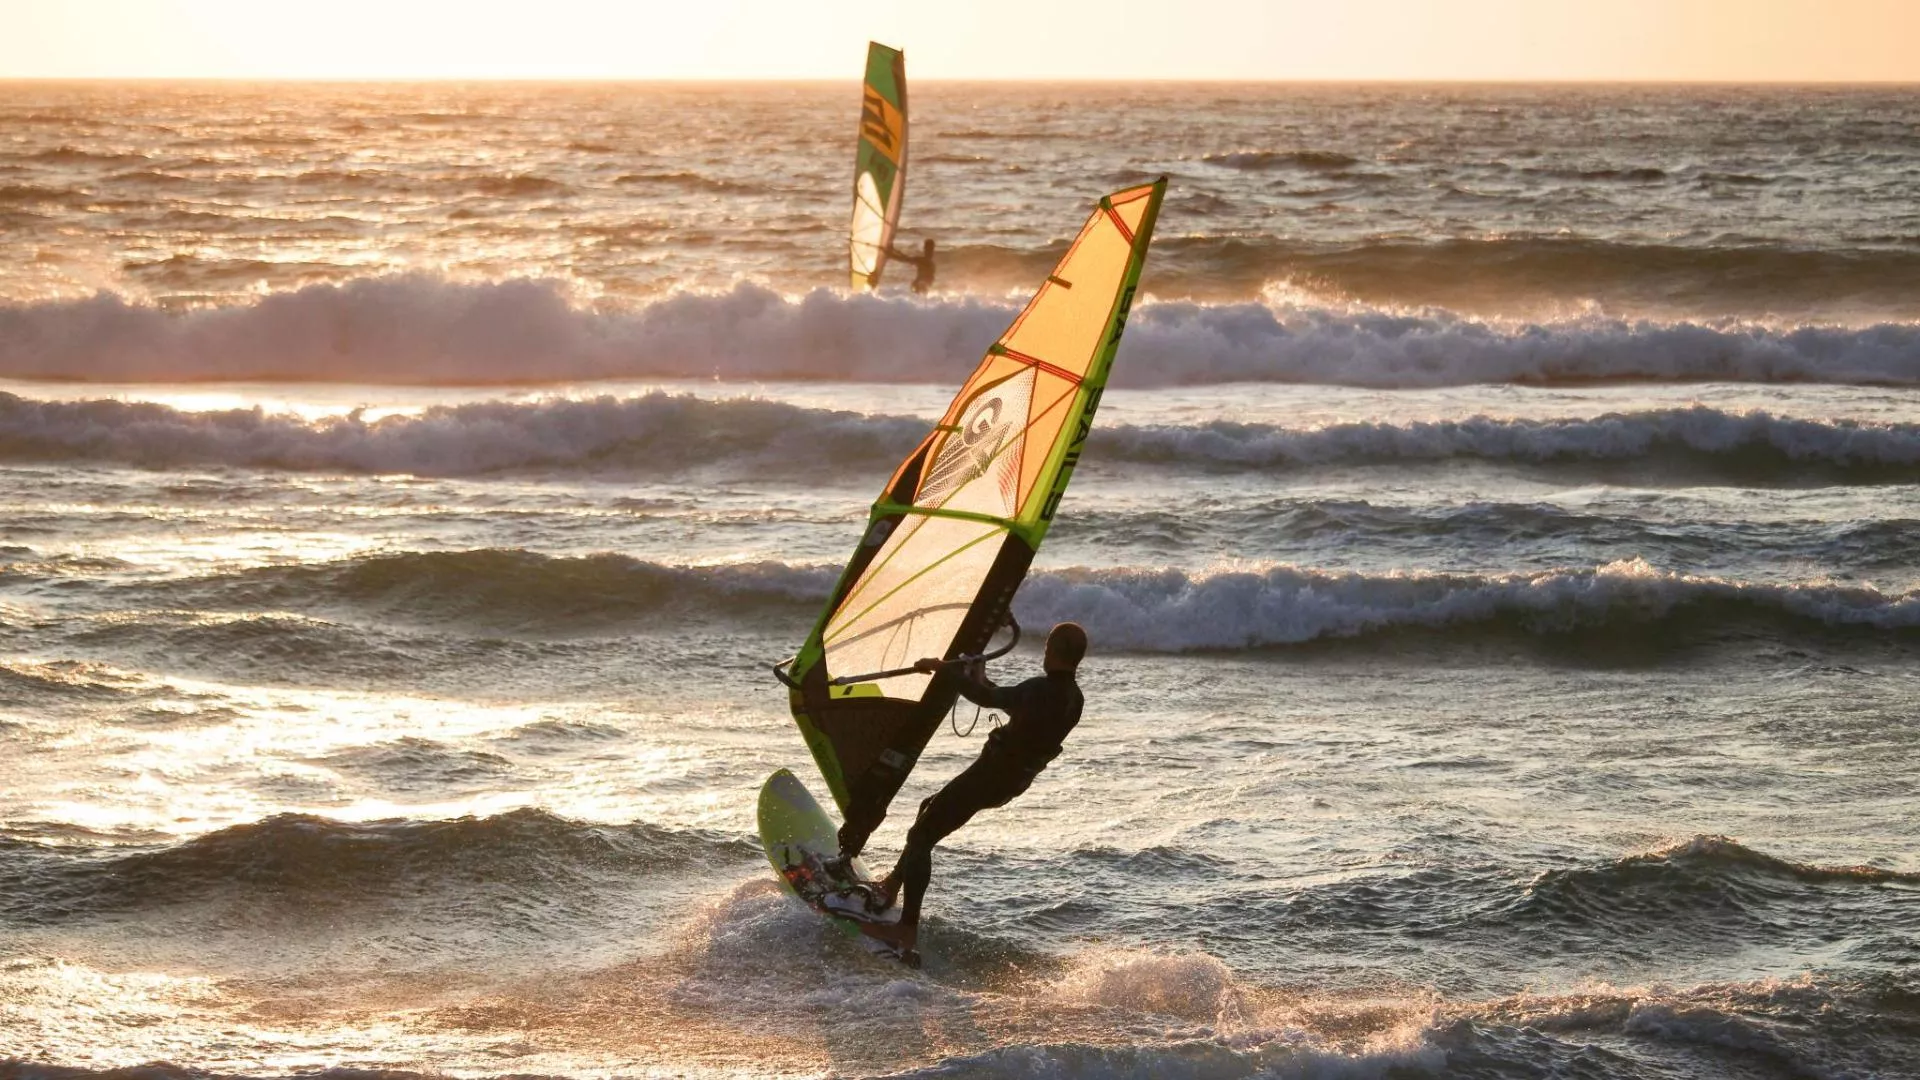 Island Style Sports in USA, North America | Surfing,Kitesurfing,Windsurfing - Rated 1.6